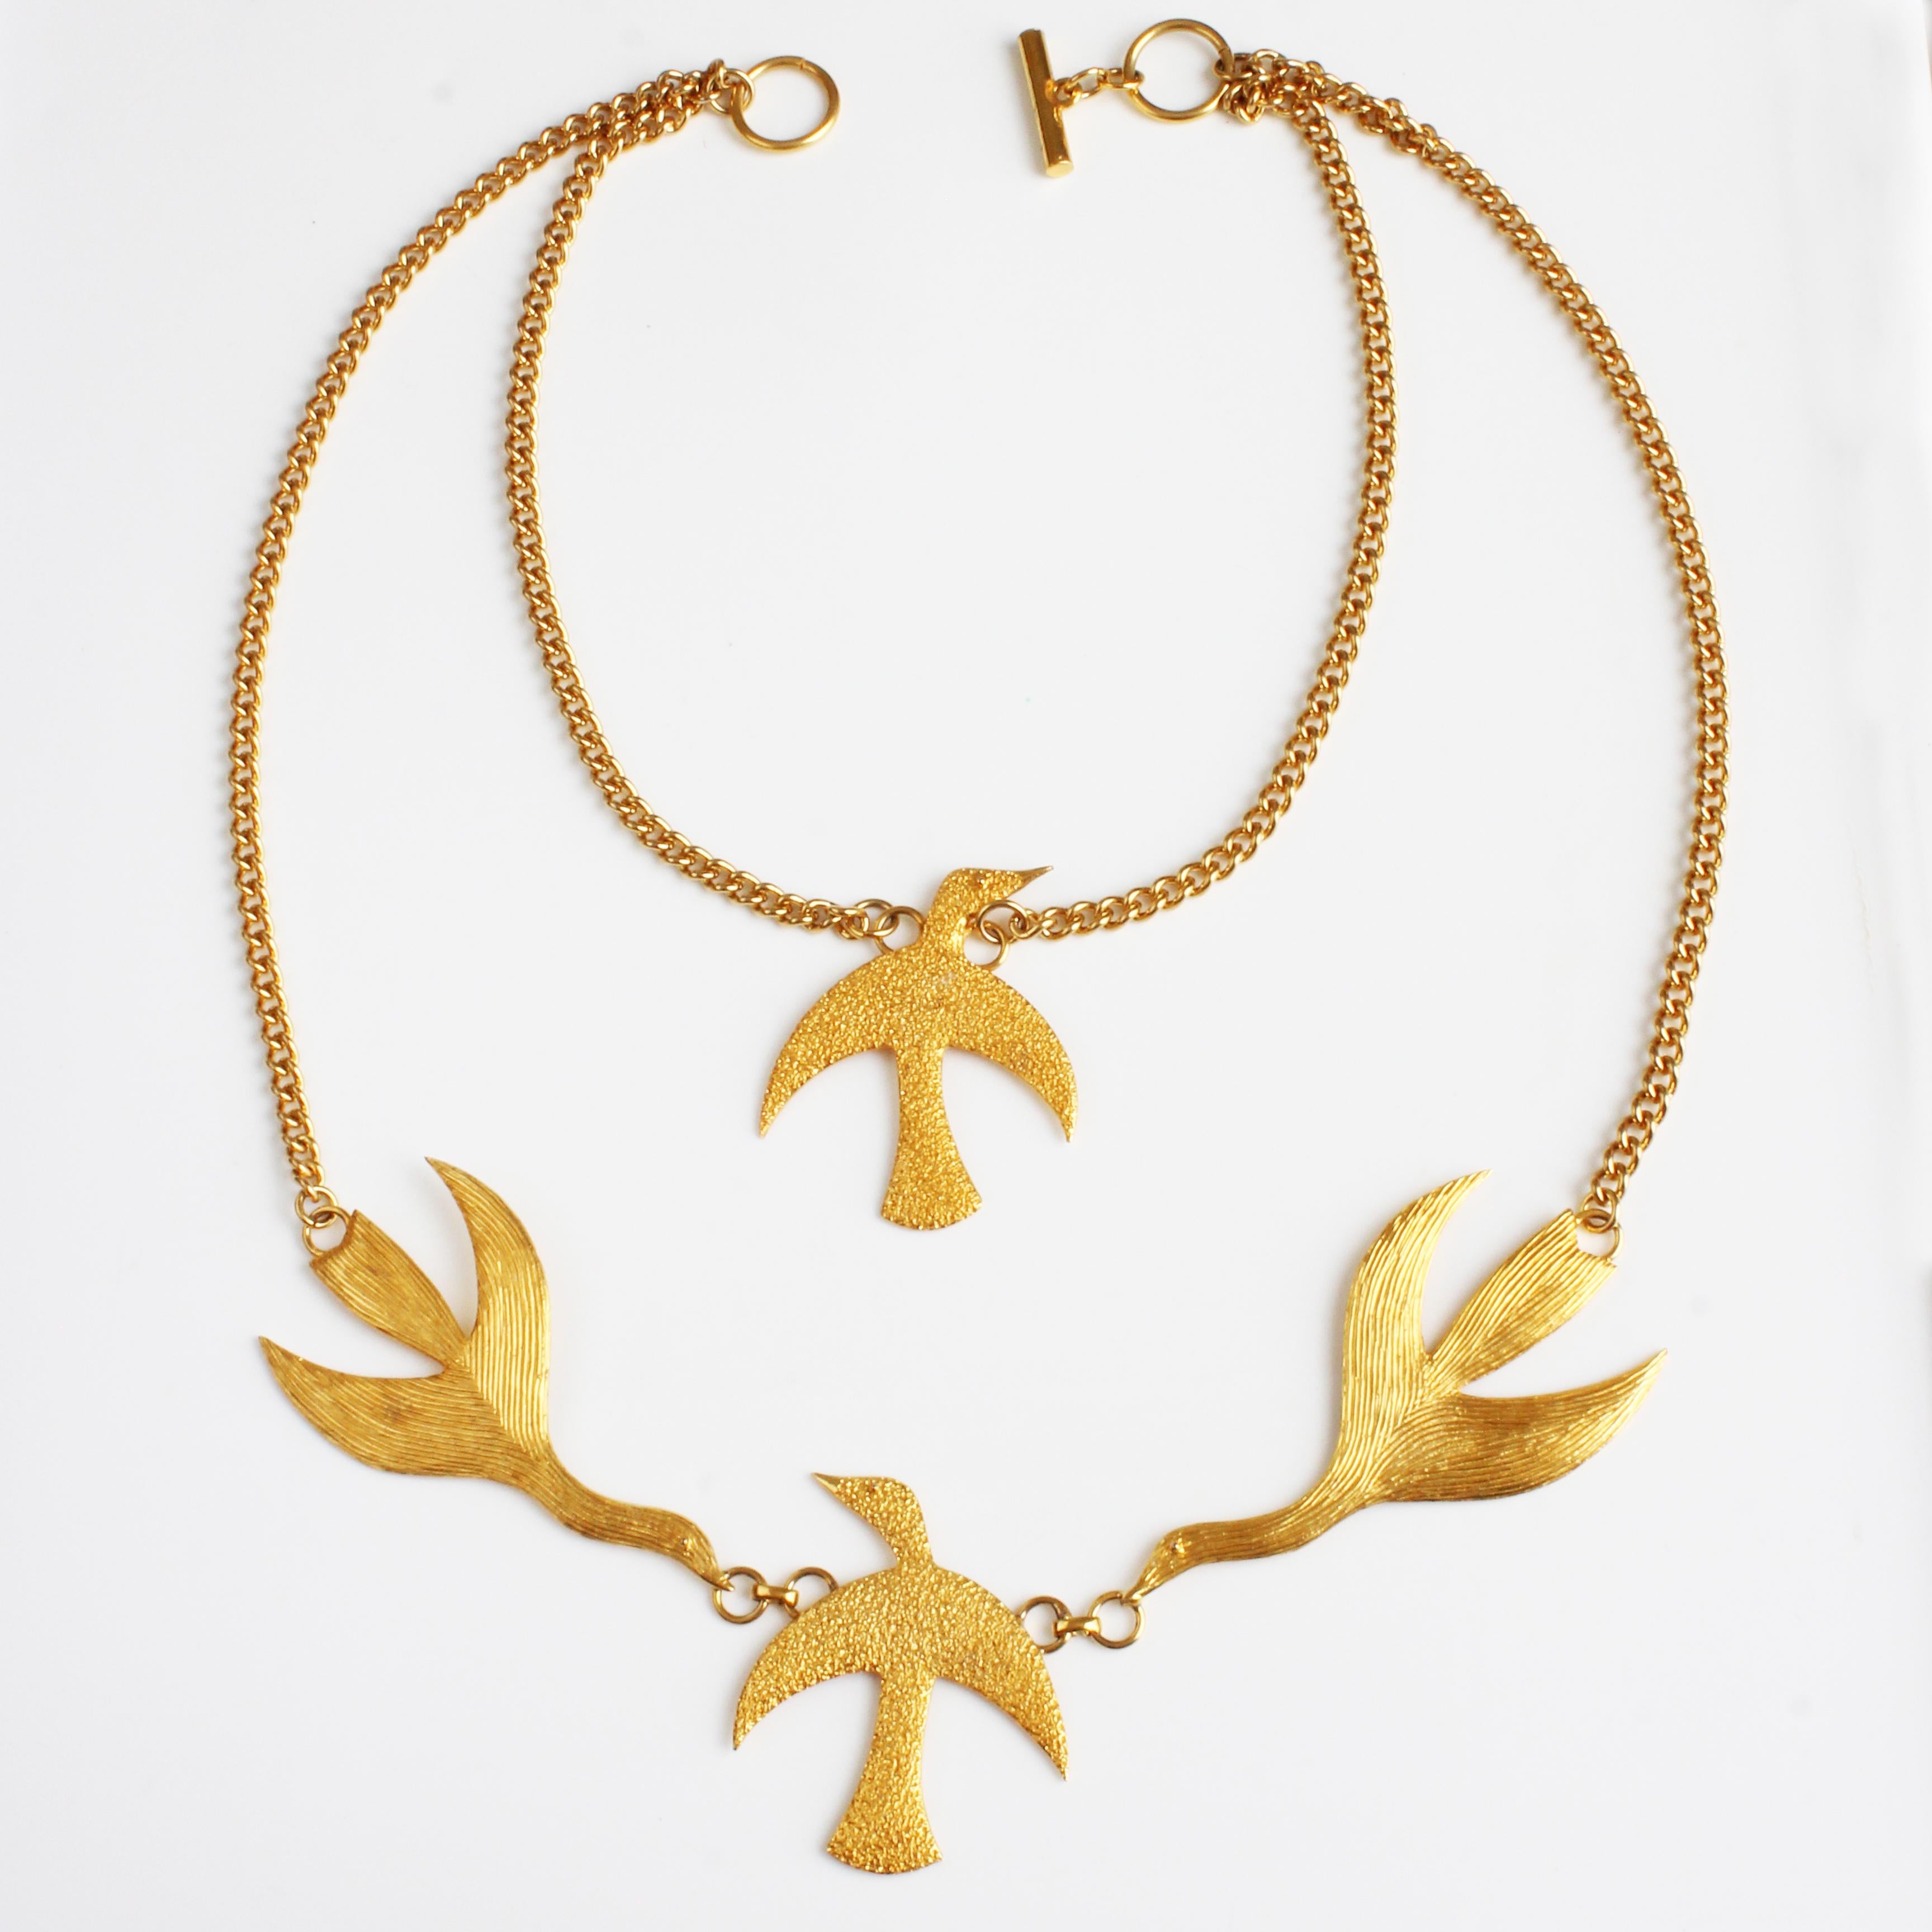 For his Spring-Summer 1988 collection, Yves Saint Laurent paid tribute to various artists including Van Gogh, Picasso and Georges Braque. This fabulous and super-rare vintage necklace is an homage to Braque, known mostly for his cubist works, and